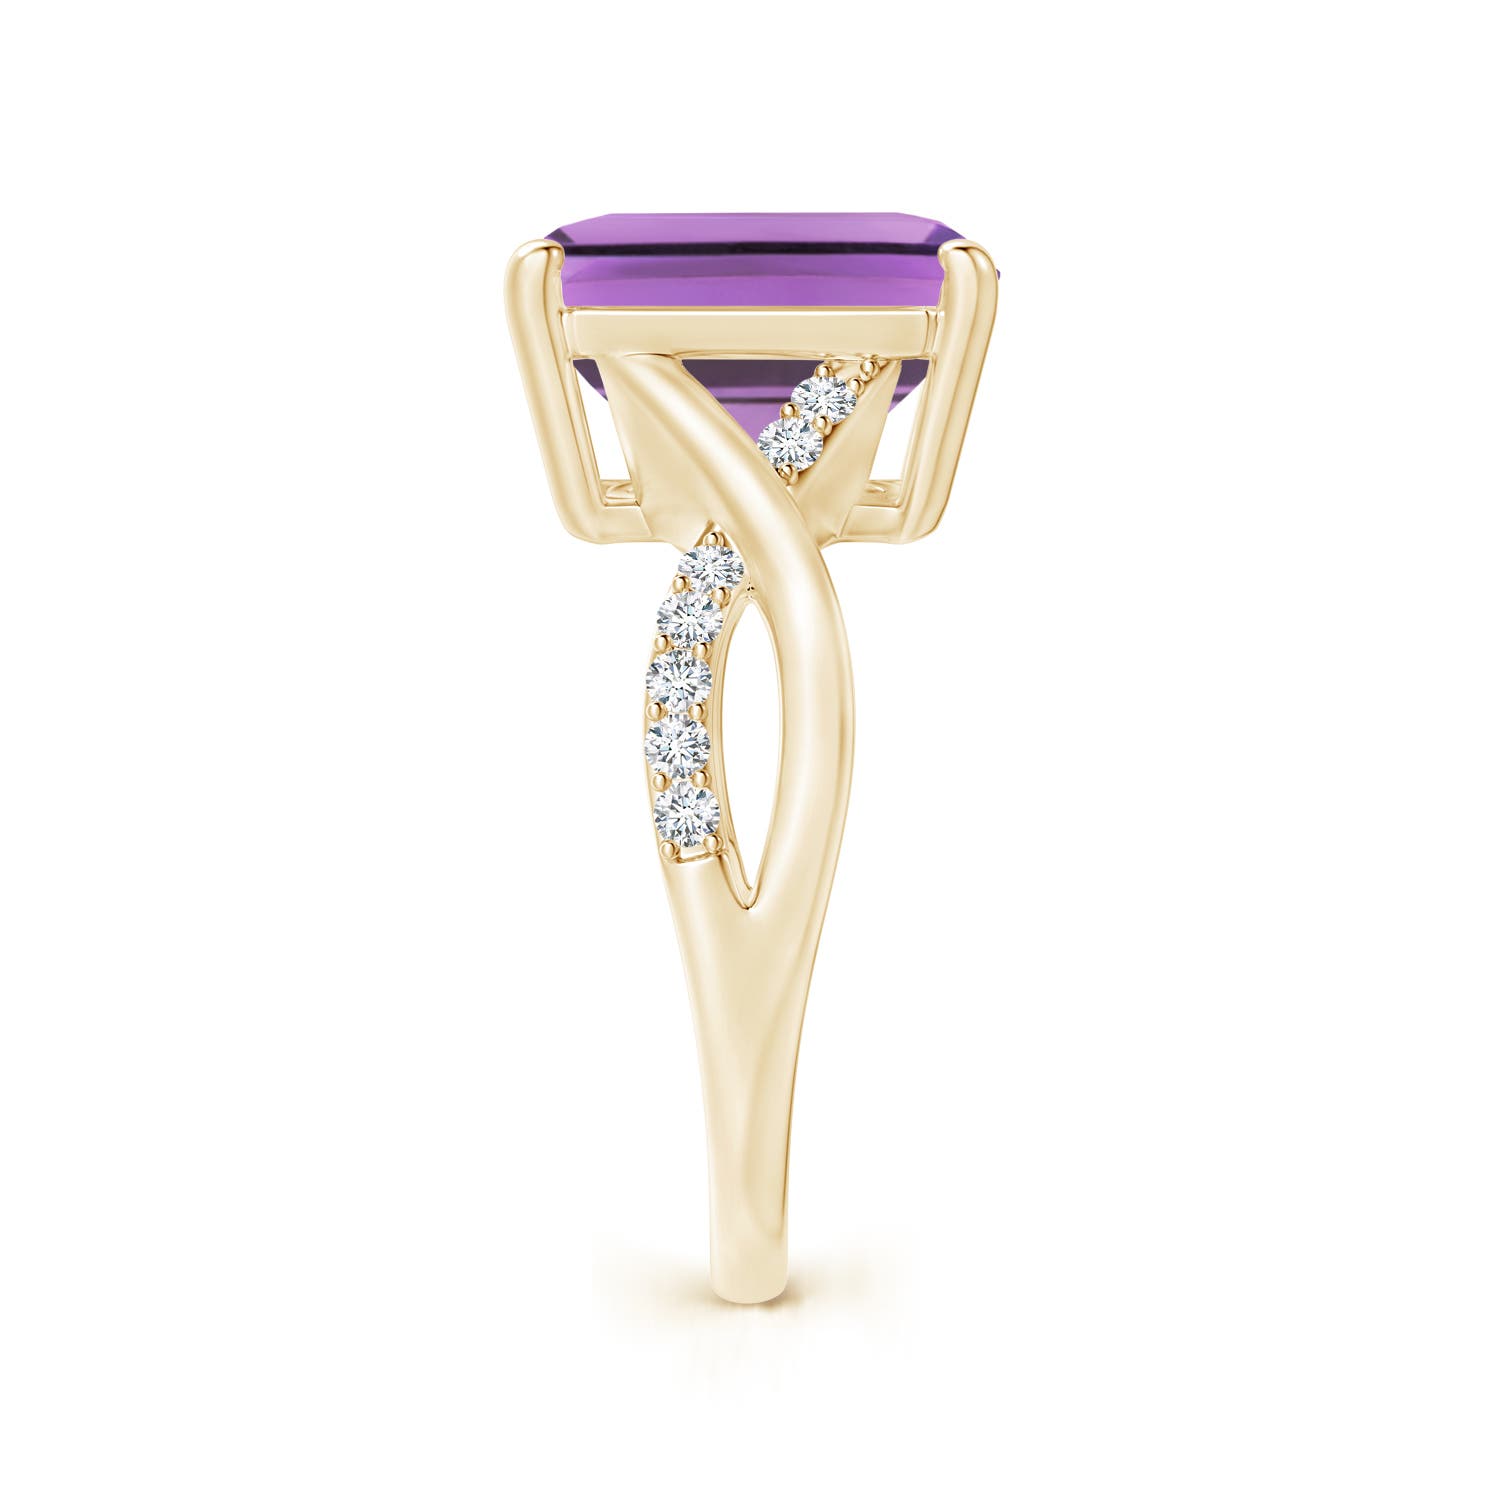 A - Amethyst / 5.47 CT / 14 KT Yellow Gold